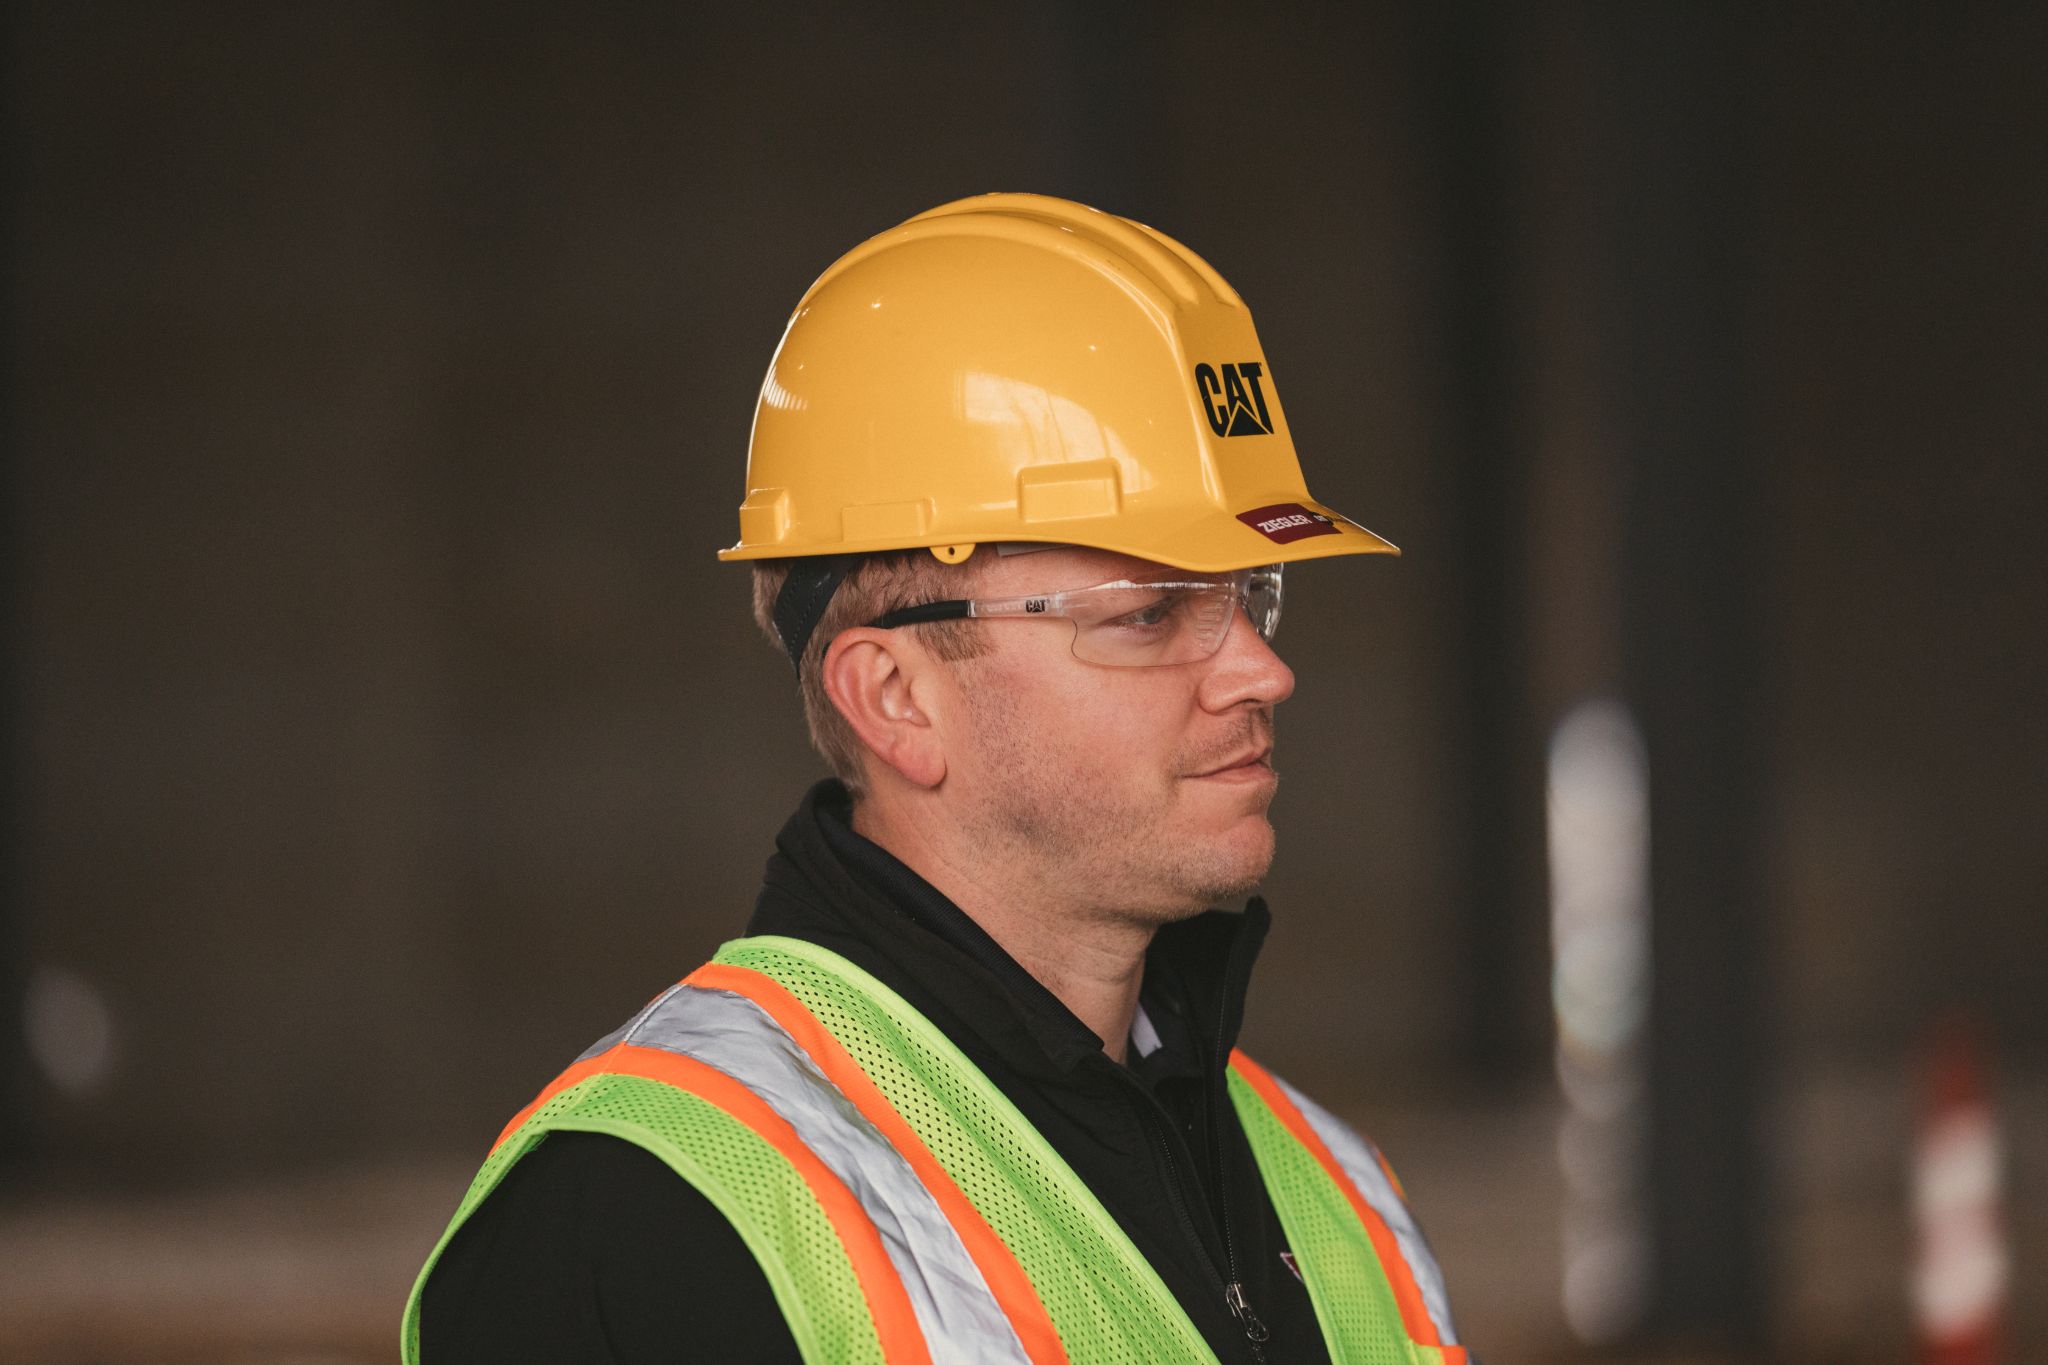 Side profile of a worker wearing a hard hat, glasses and safety vest